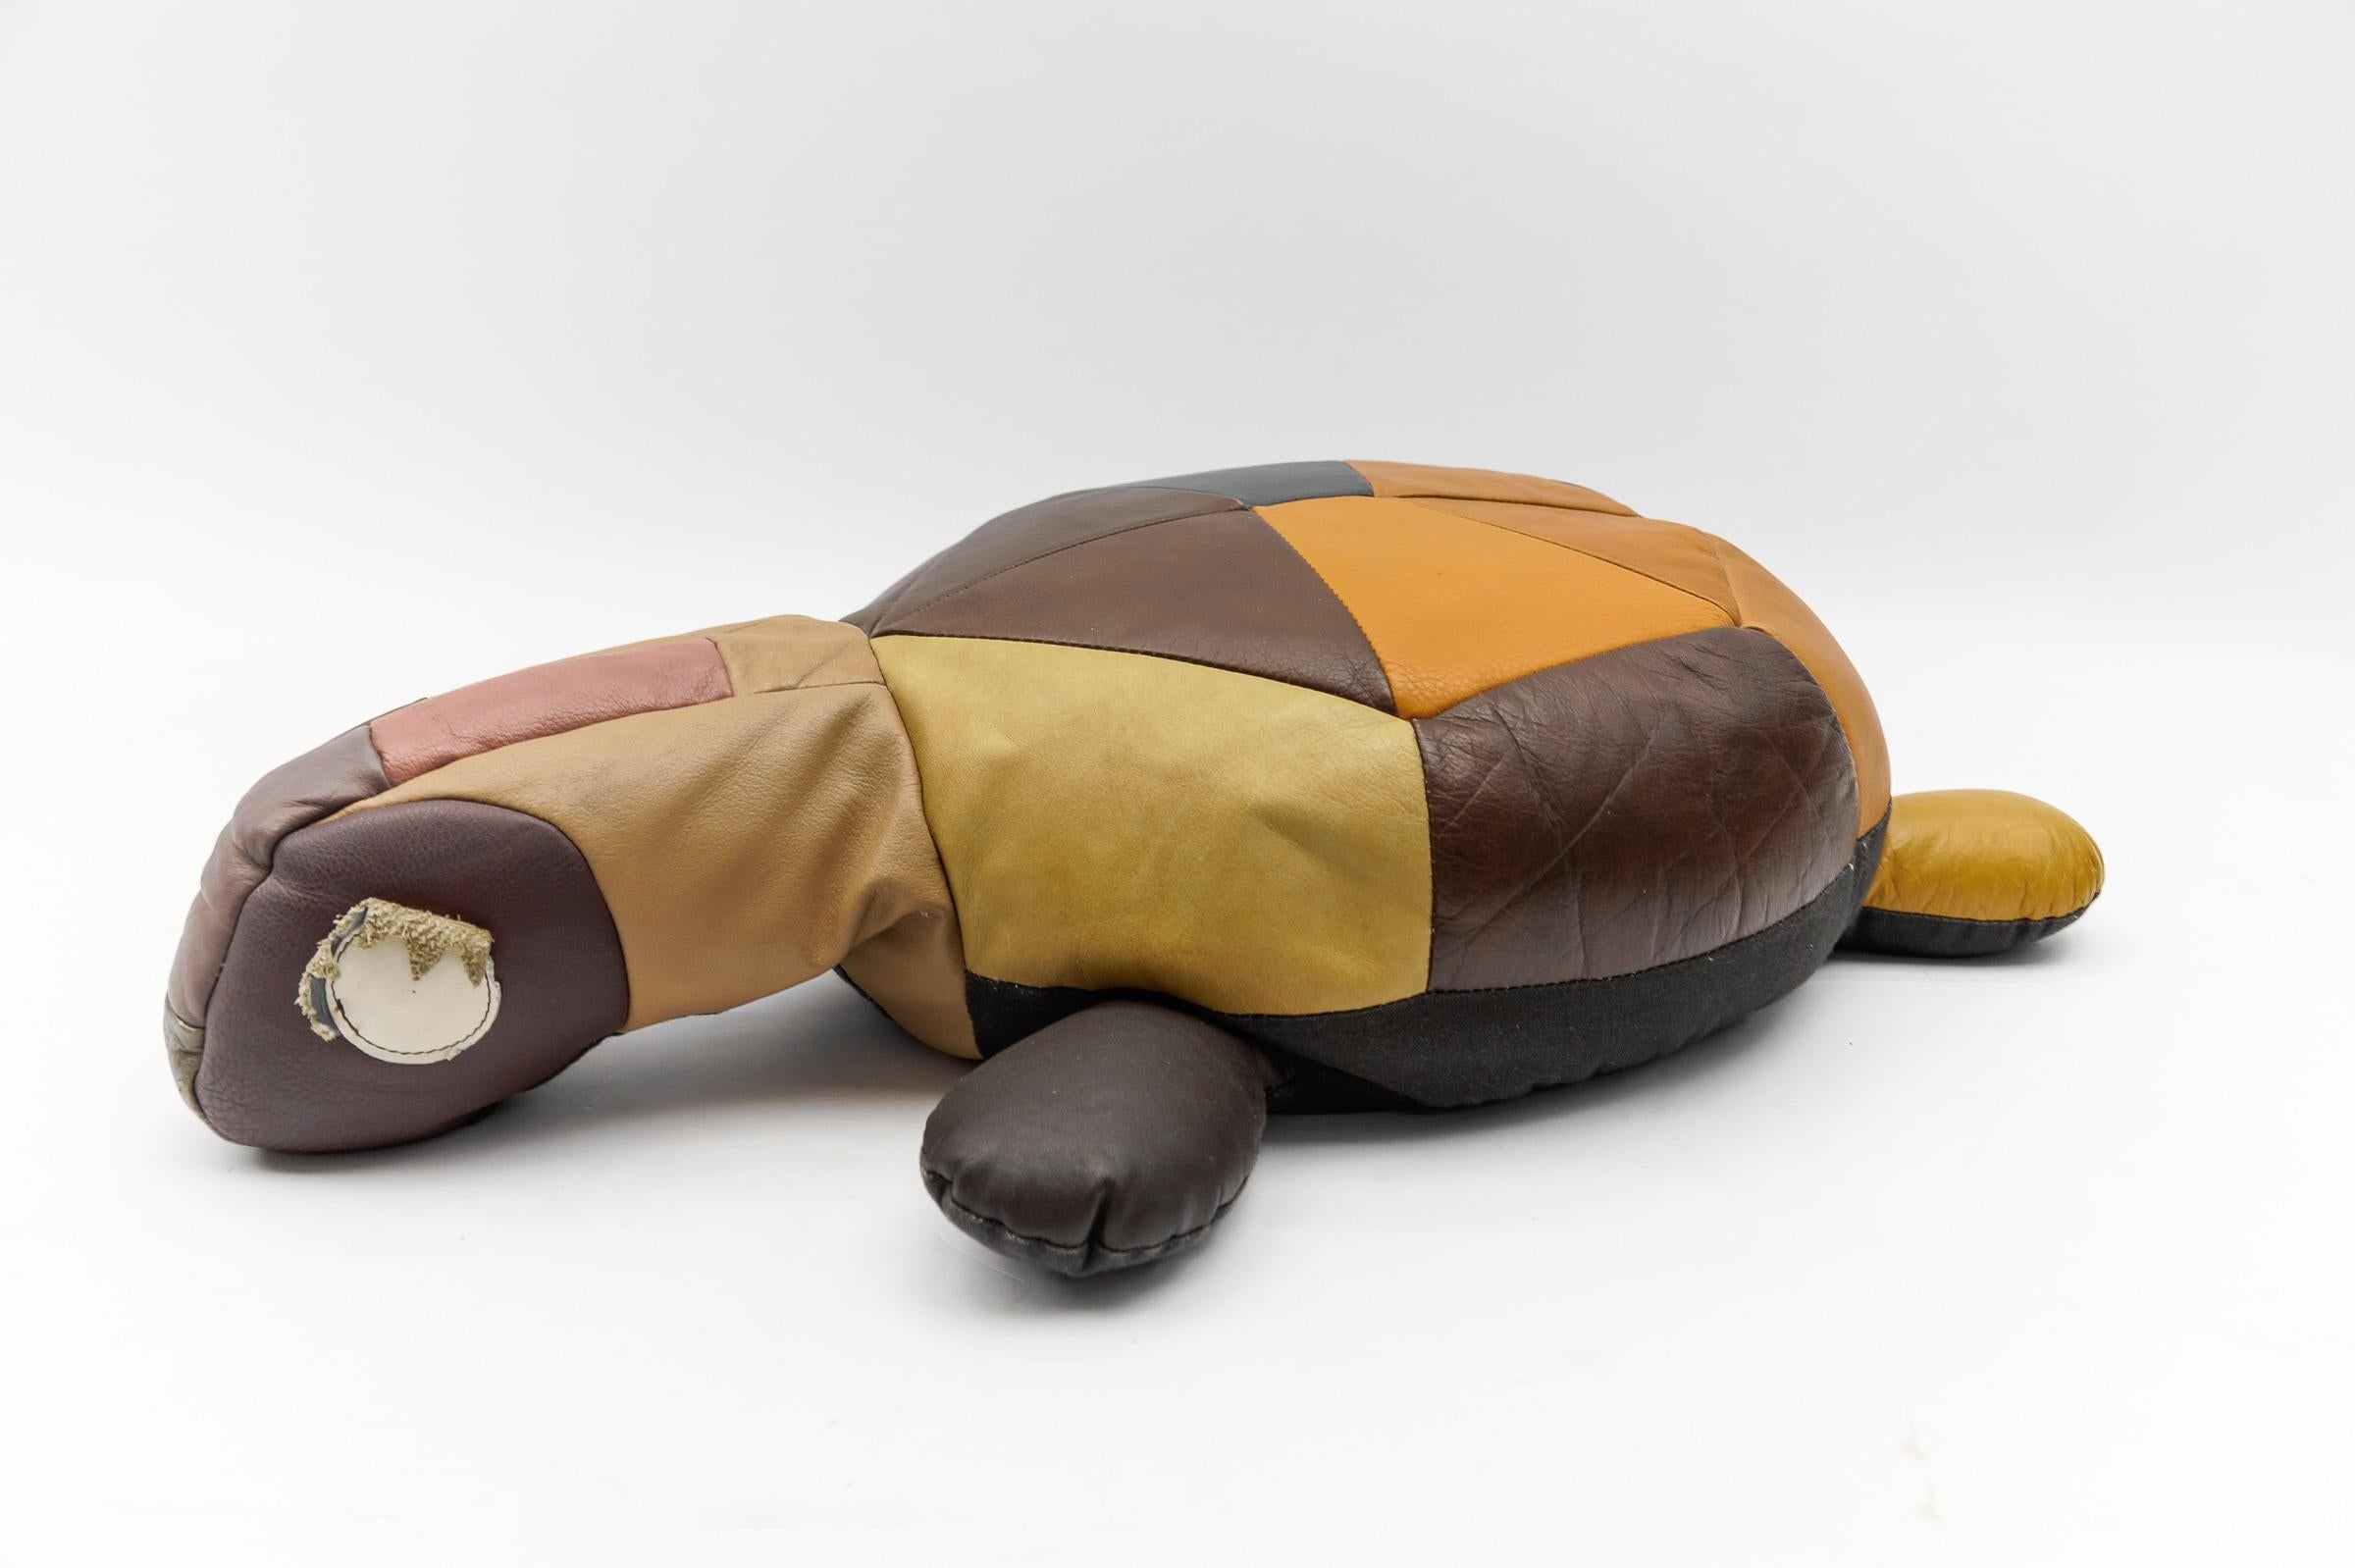 Swiss Mid-Century Modern Leather Patchwork Turtle Pouf, Switzerland 1960s For Sale